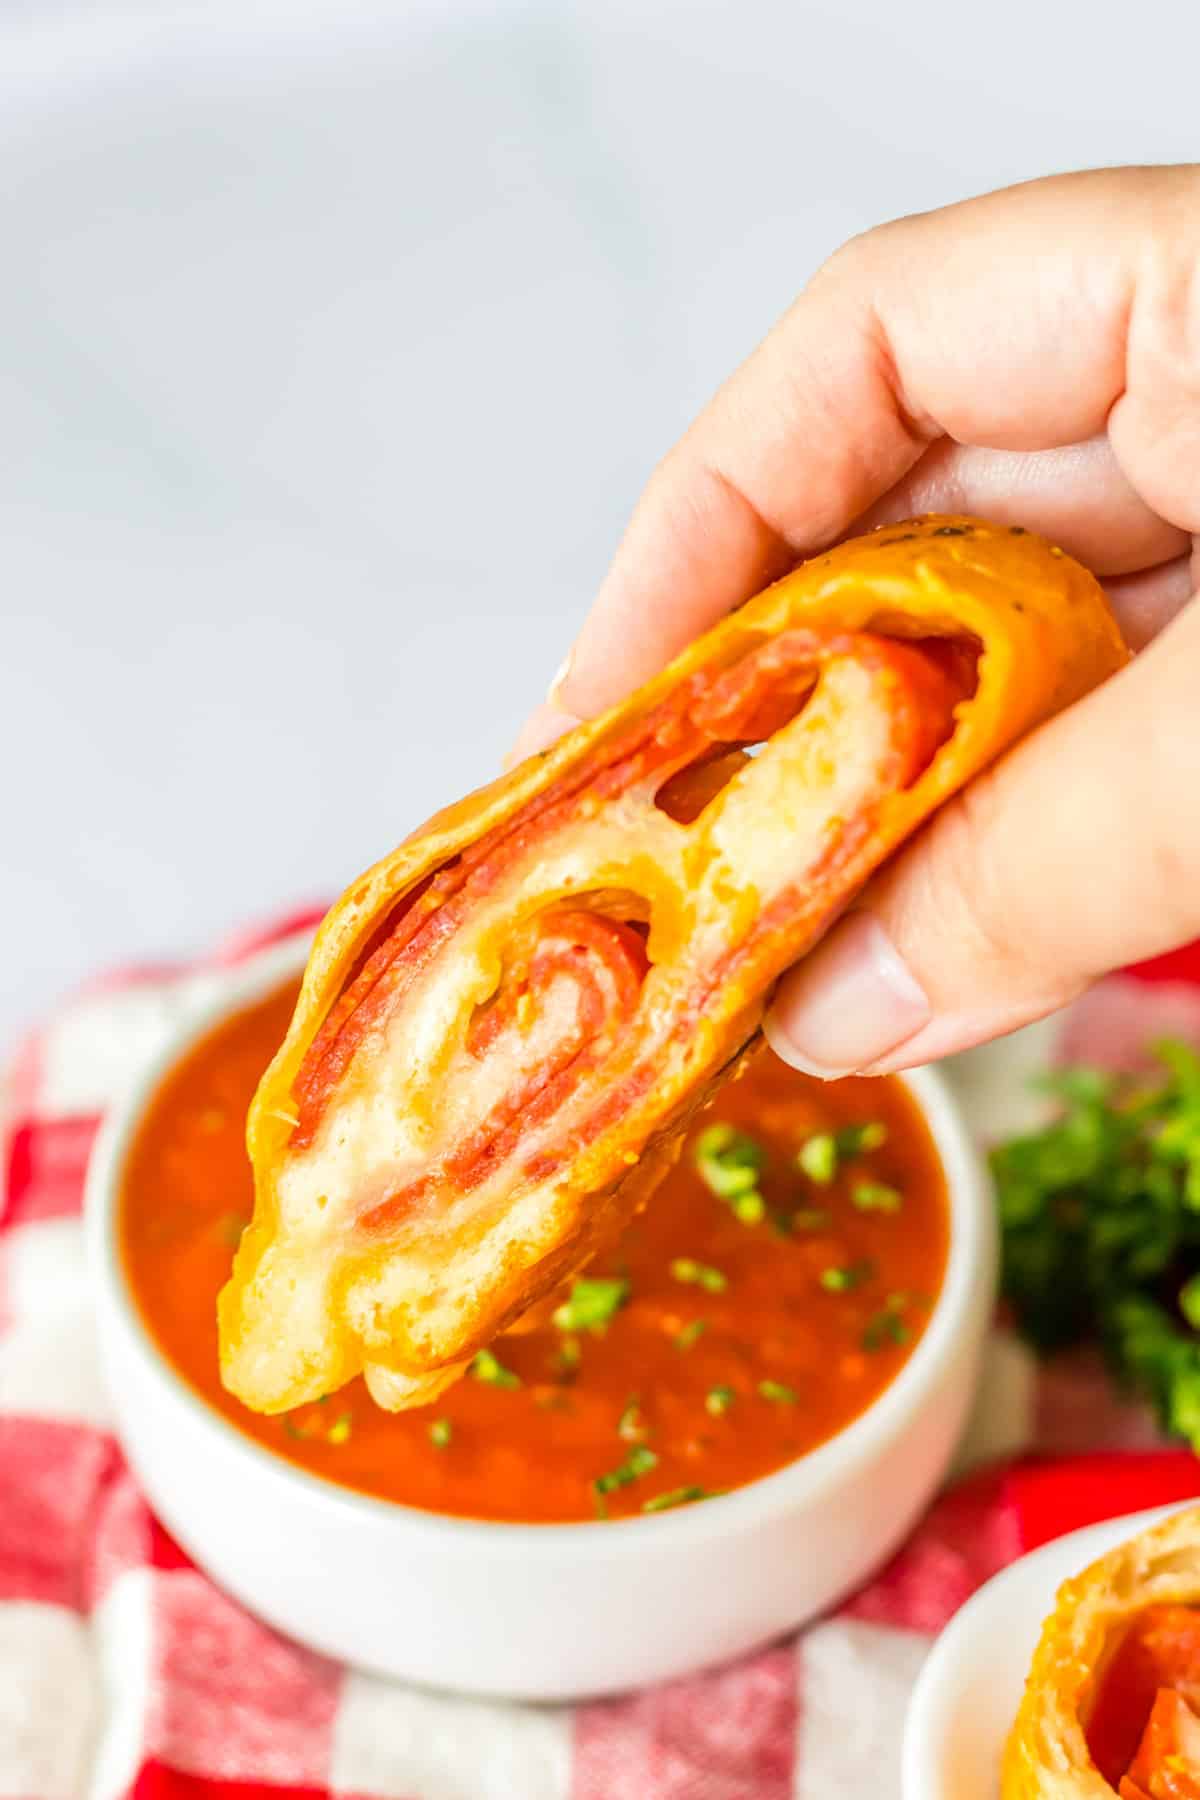 Slice of pepperoni bread being dunked in small bowl of marinara sauce.